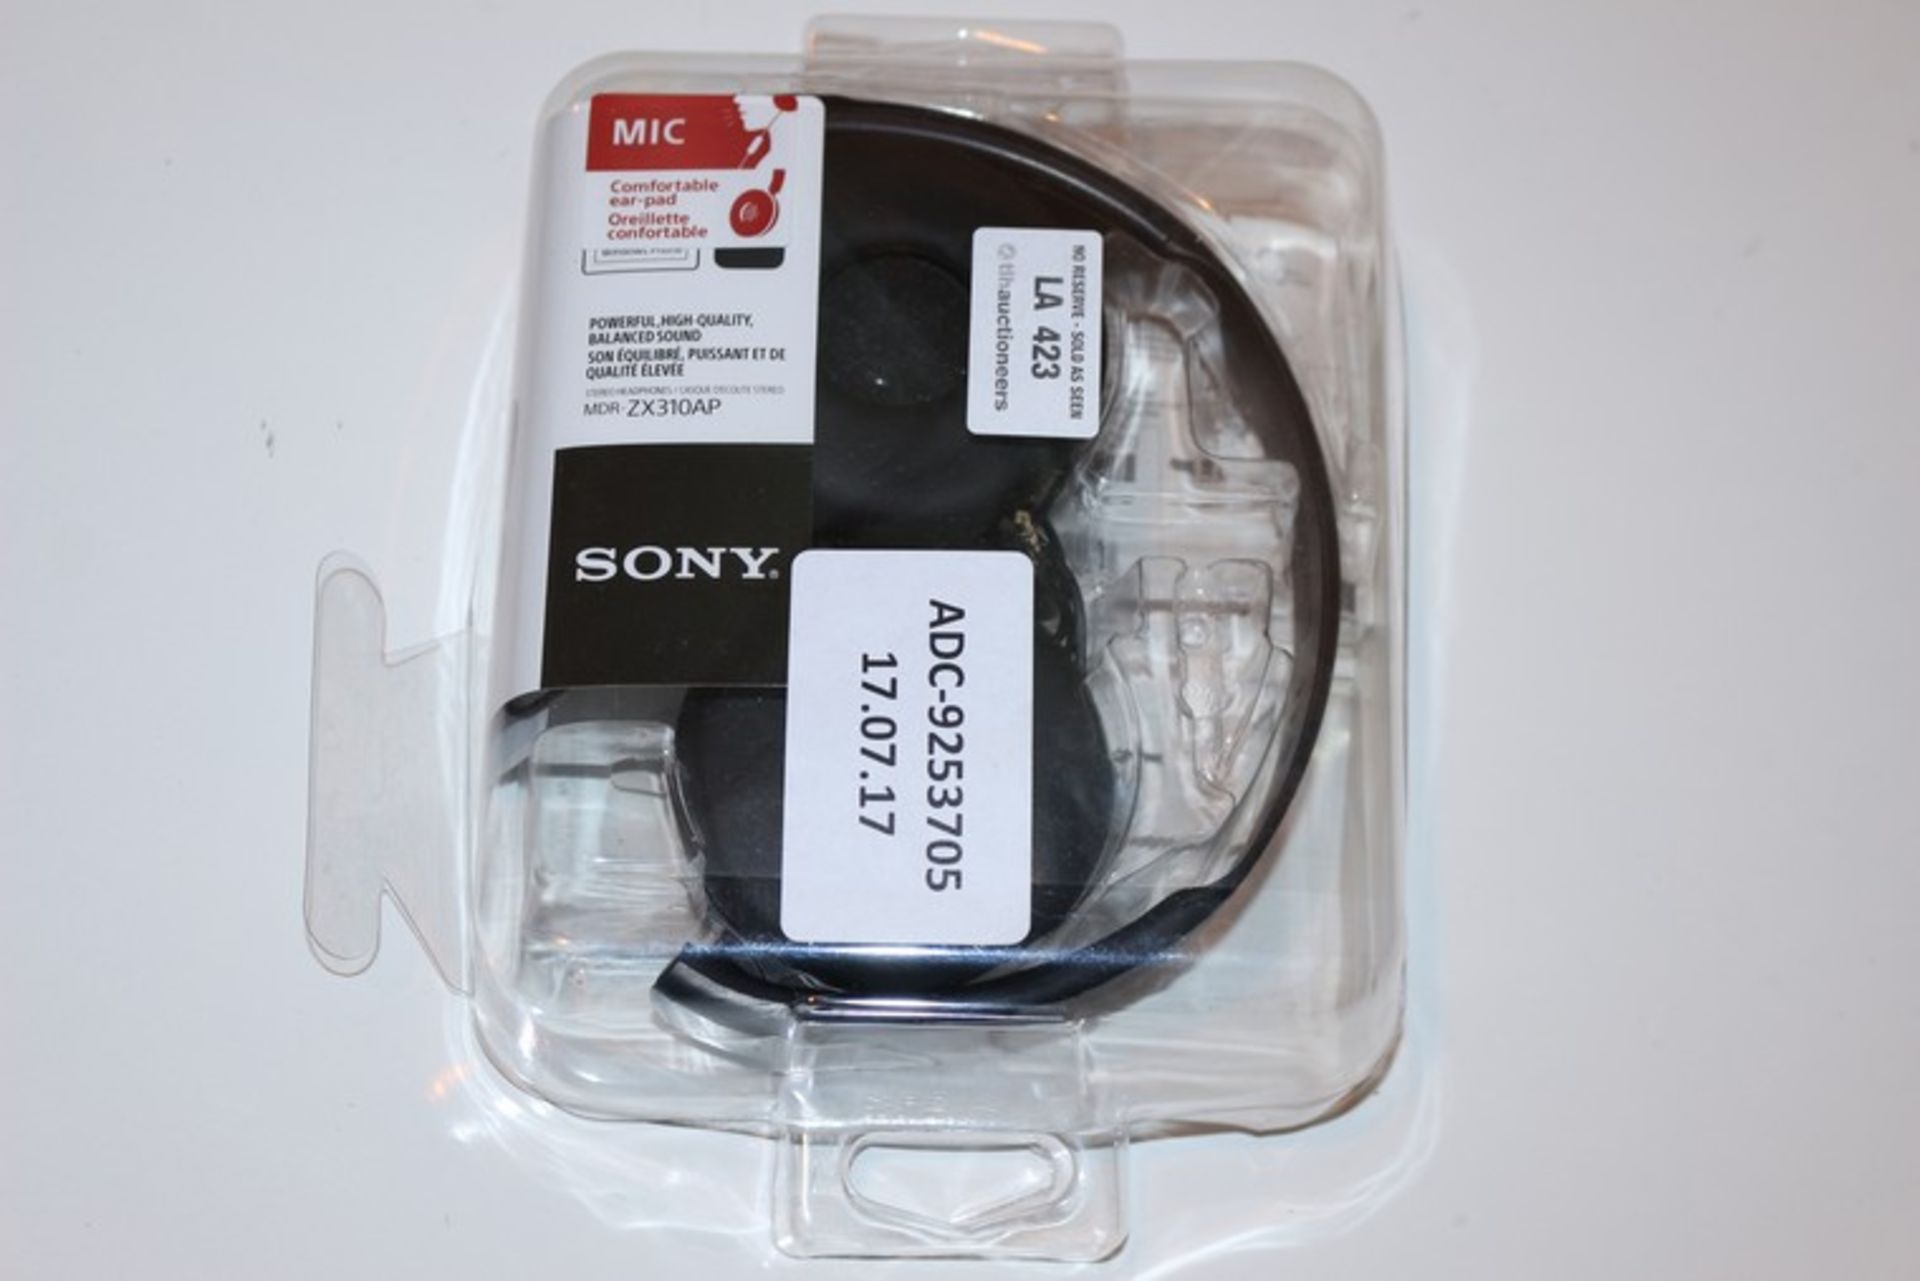 1 x BOXED PAIR OF SONY MDRZX310AP STEREO HEADPHONES (17.7.17) *PLEASE NOTE THAT THE BID PRICE IS